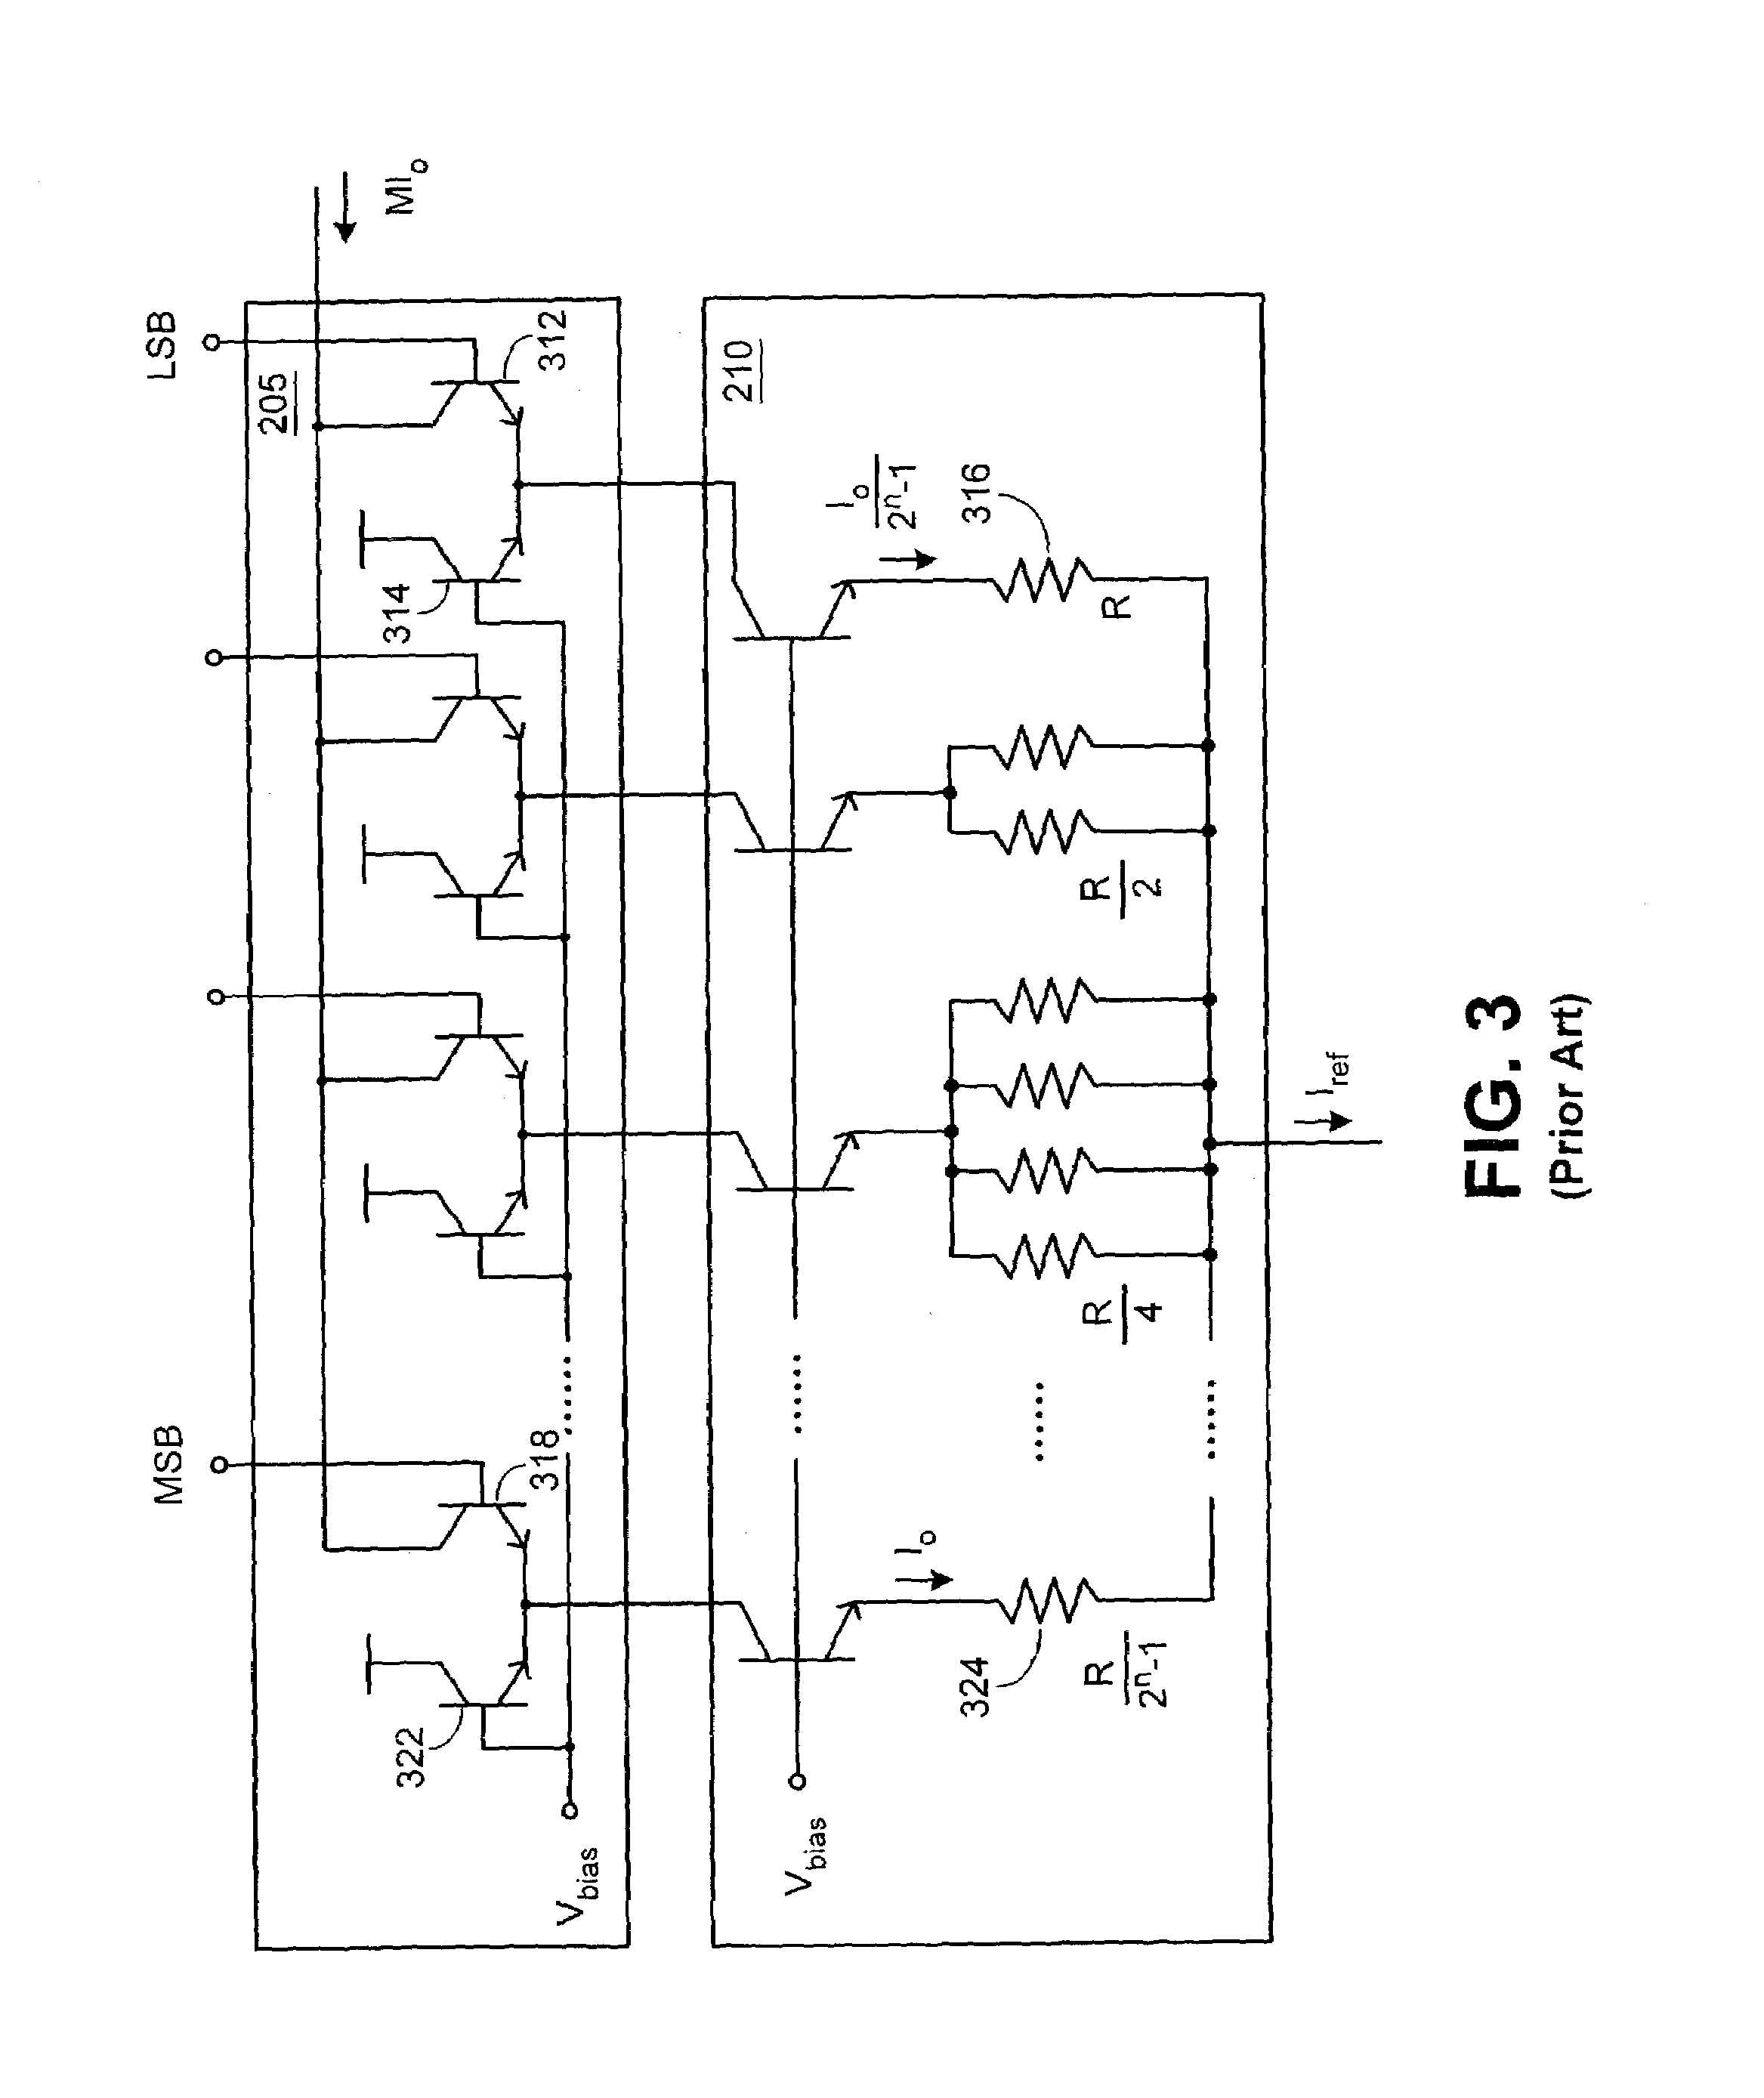 Floating-gate reference circuit